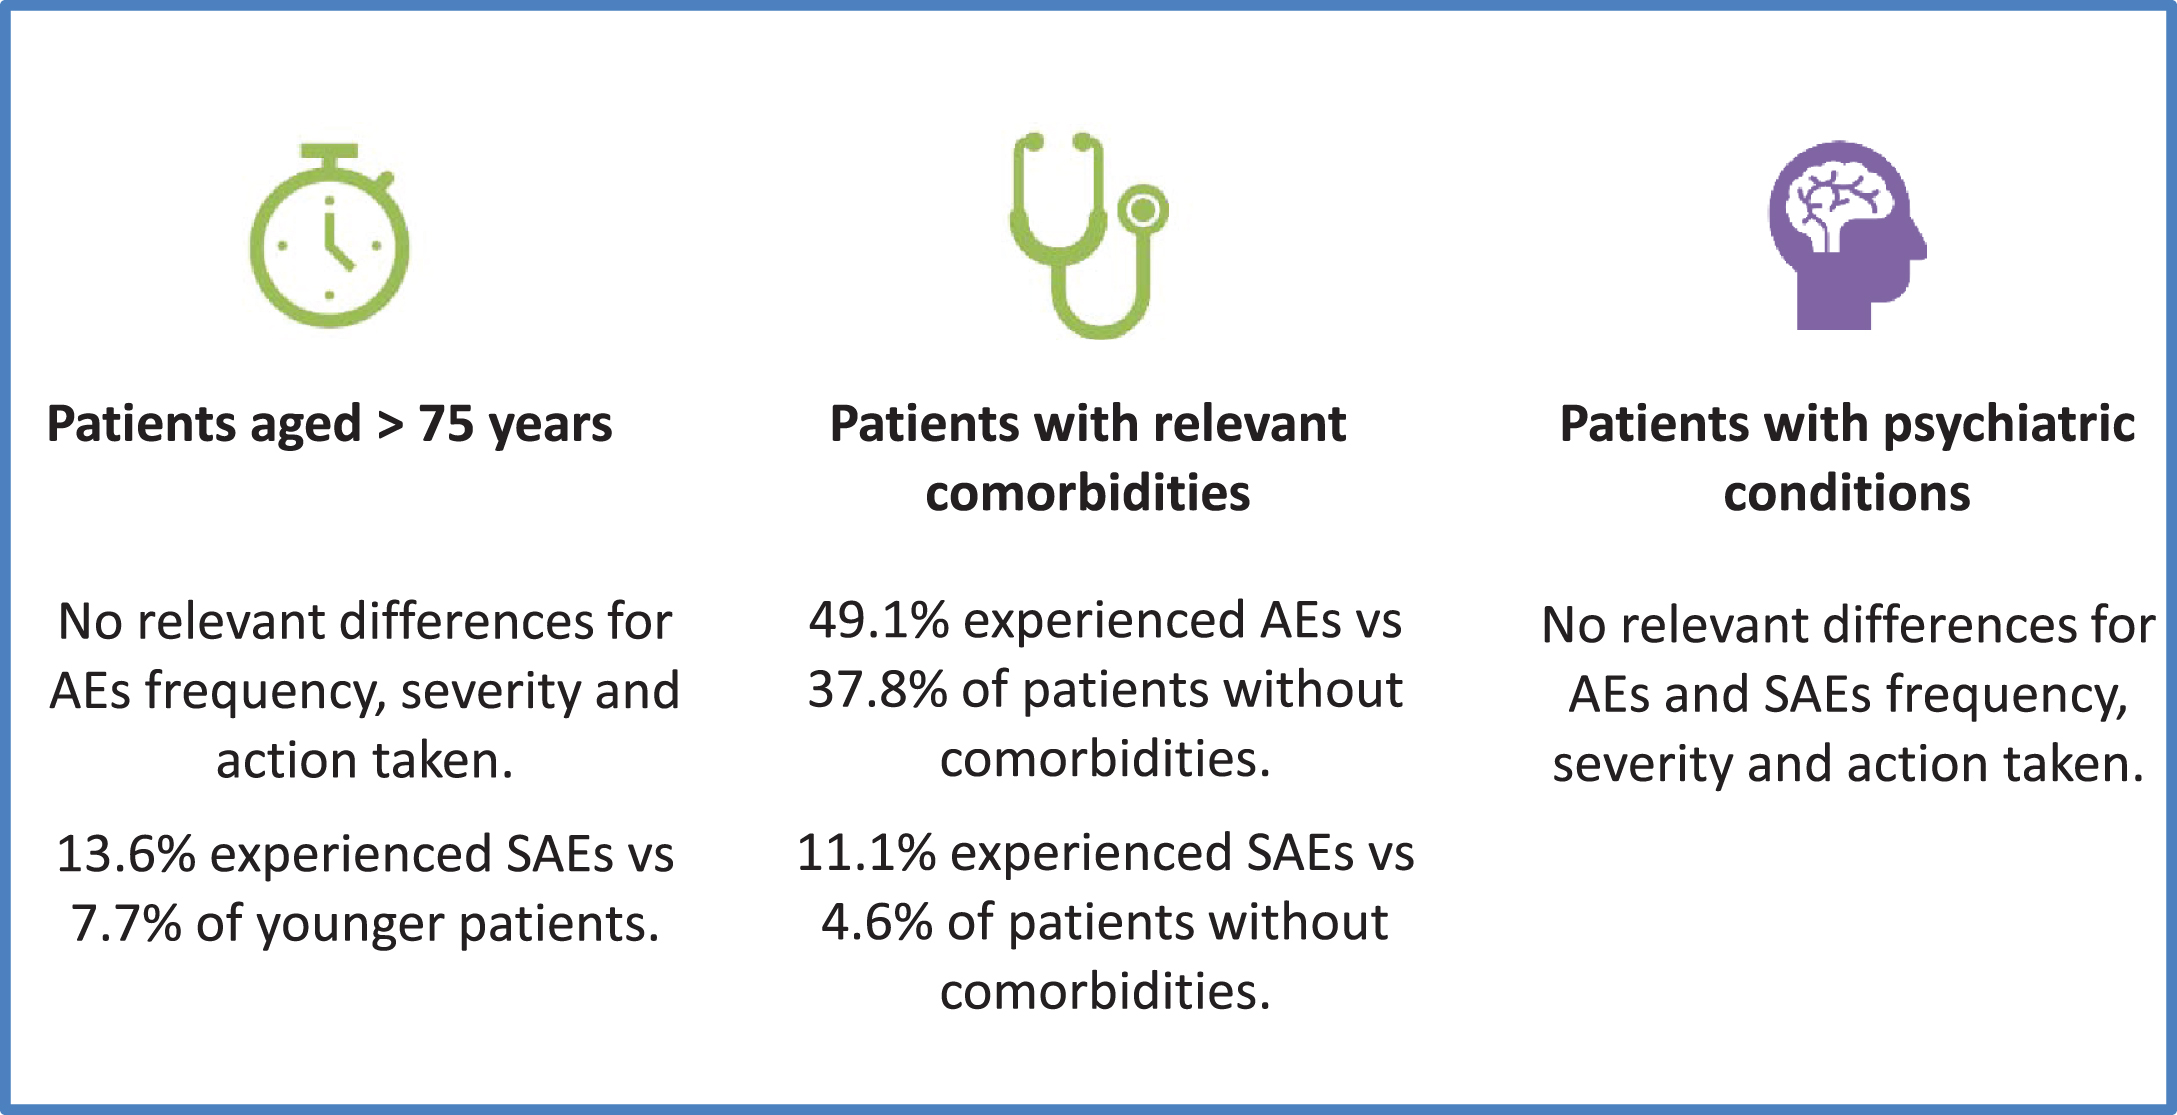 Safety summary in subgroups of patients. AE, Adverse Event; SAE, Serious Adverse Event.